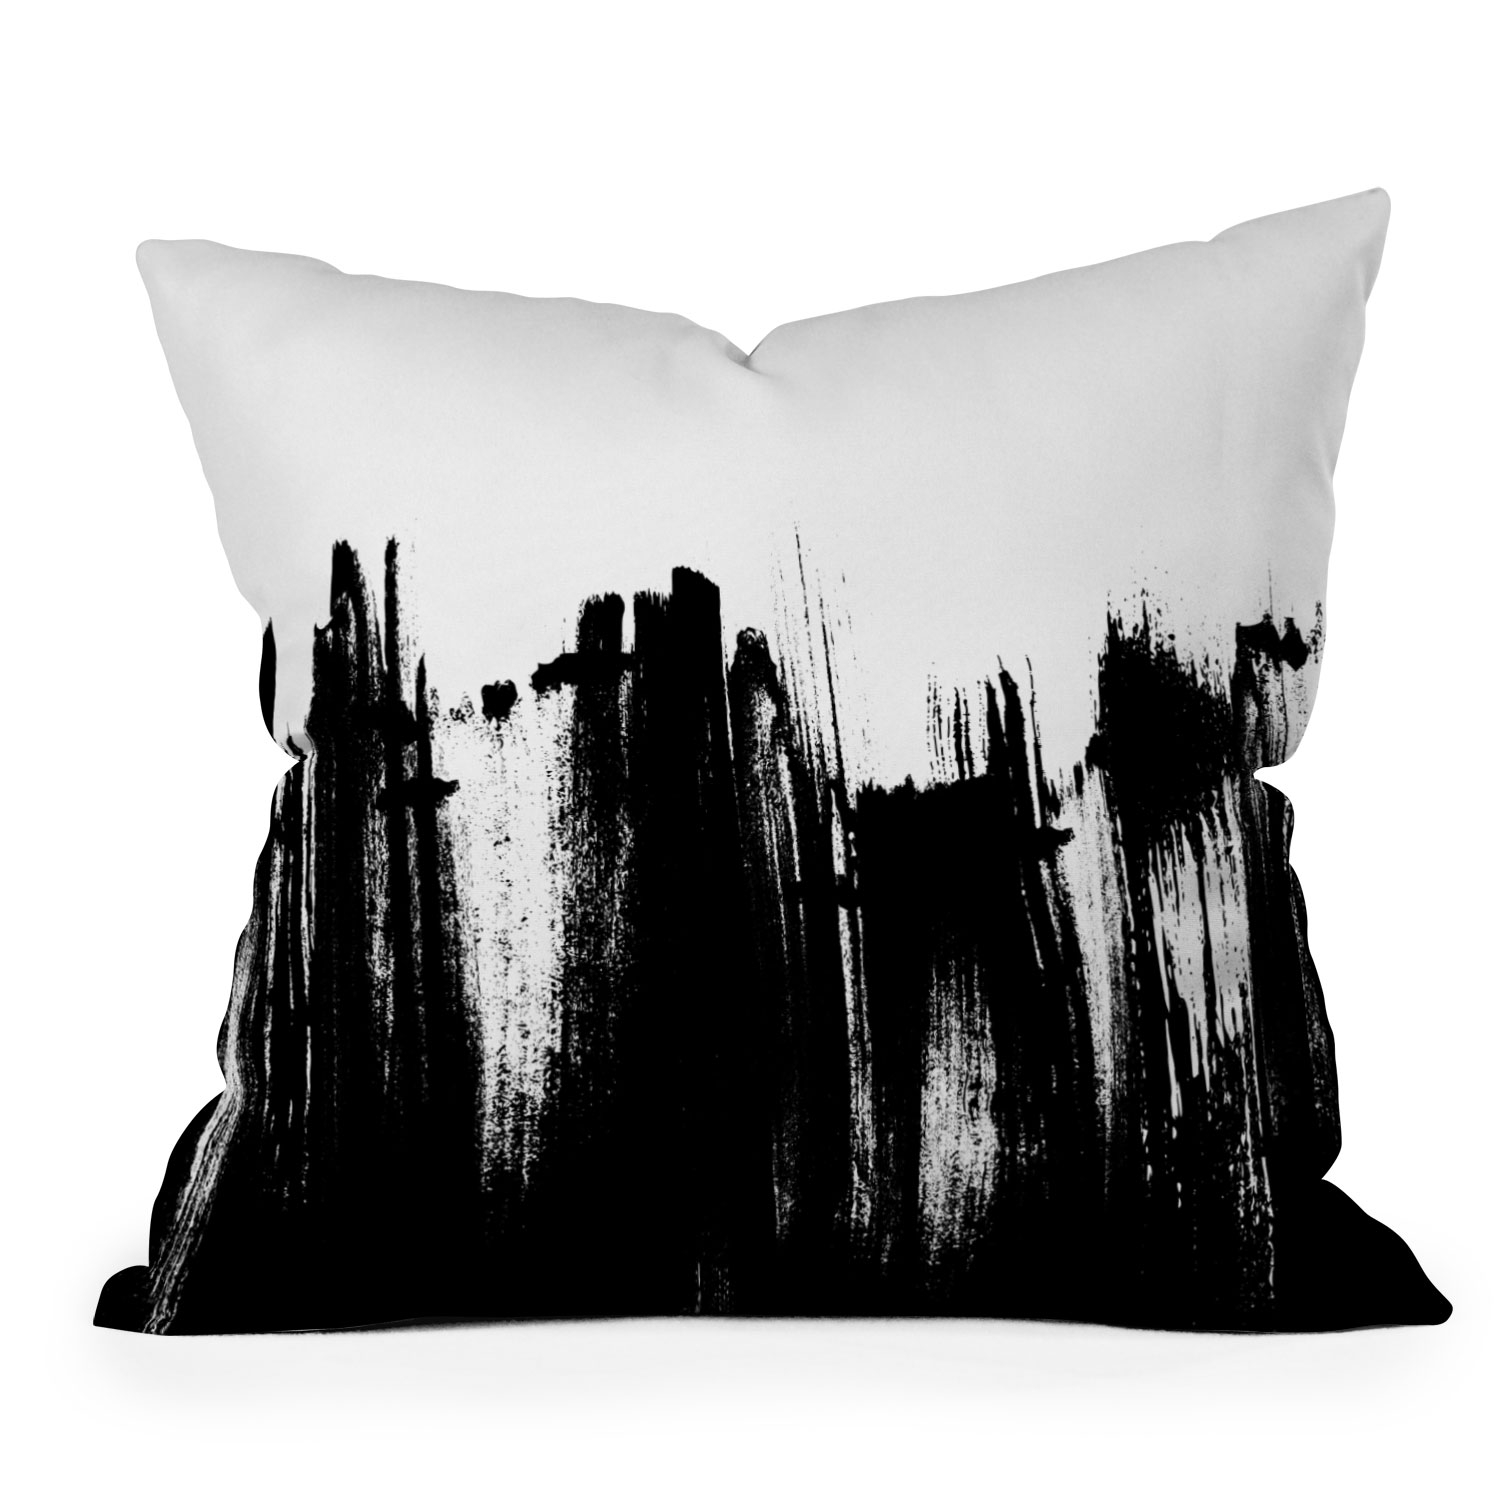 Monochrome Brushstrokes by Kelly Haines - Outdoor Throw Pillow 18" x 18" - Image 0